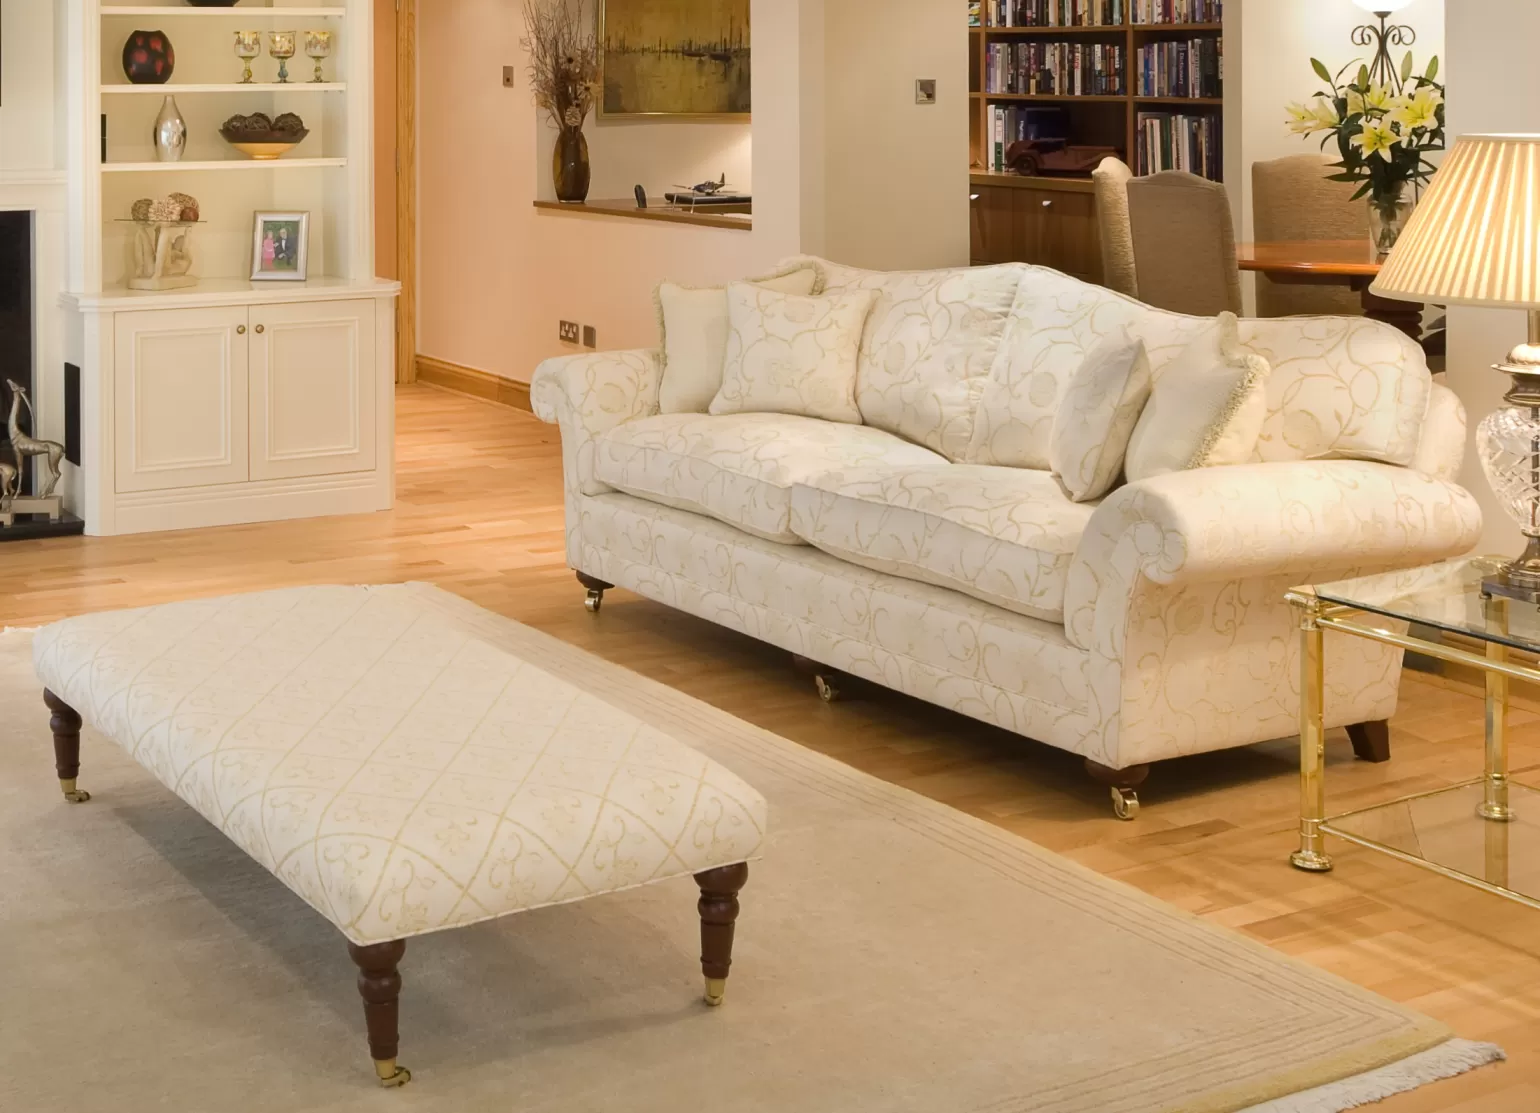 A range of furniture ideally suited for the more formal drawing room, especially when using traditional damask fabrics, showing the full beauty of an outstandingly designed range of furniture.
